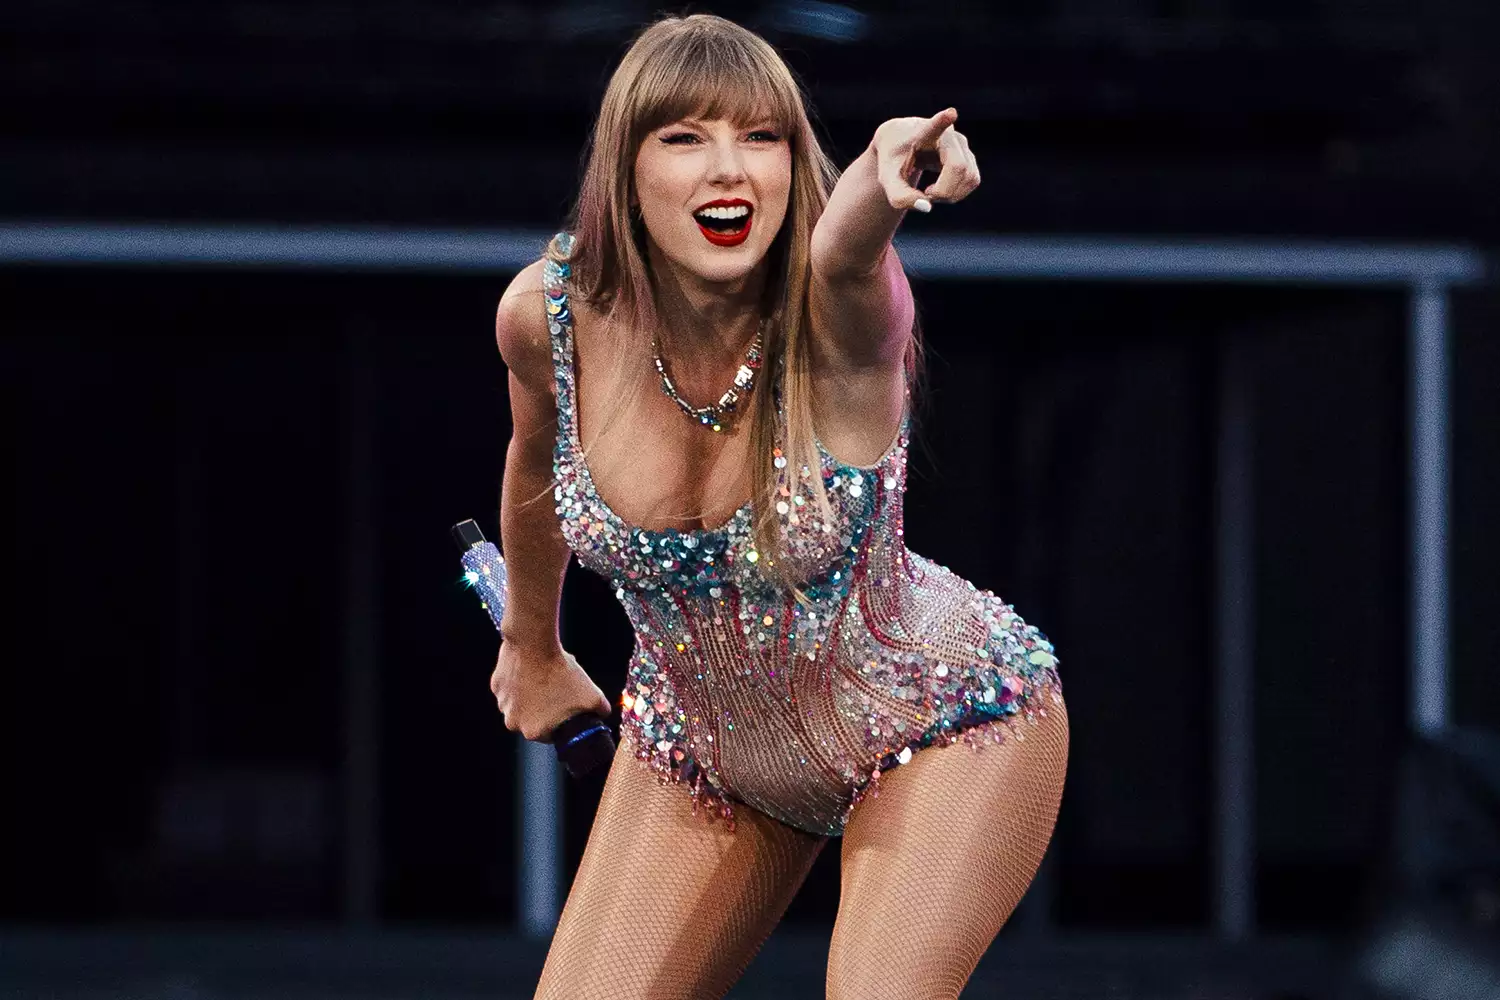 Taylor Swift Speaks Portuguese as She Performs First Ever Show in Lisbon for Eras Tour: The singer performed the first of two shows as part of the Eras tour at Lisbons’ Estádio da Luz stadium